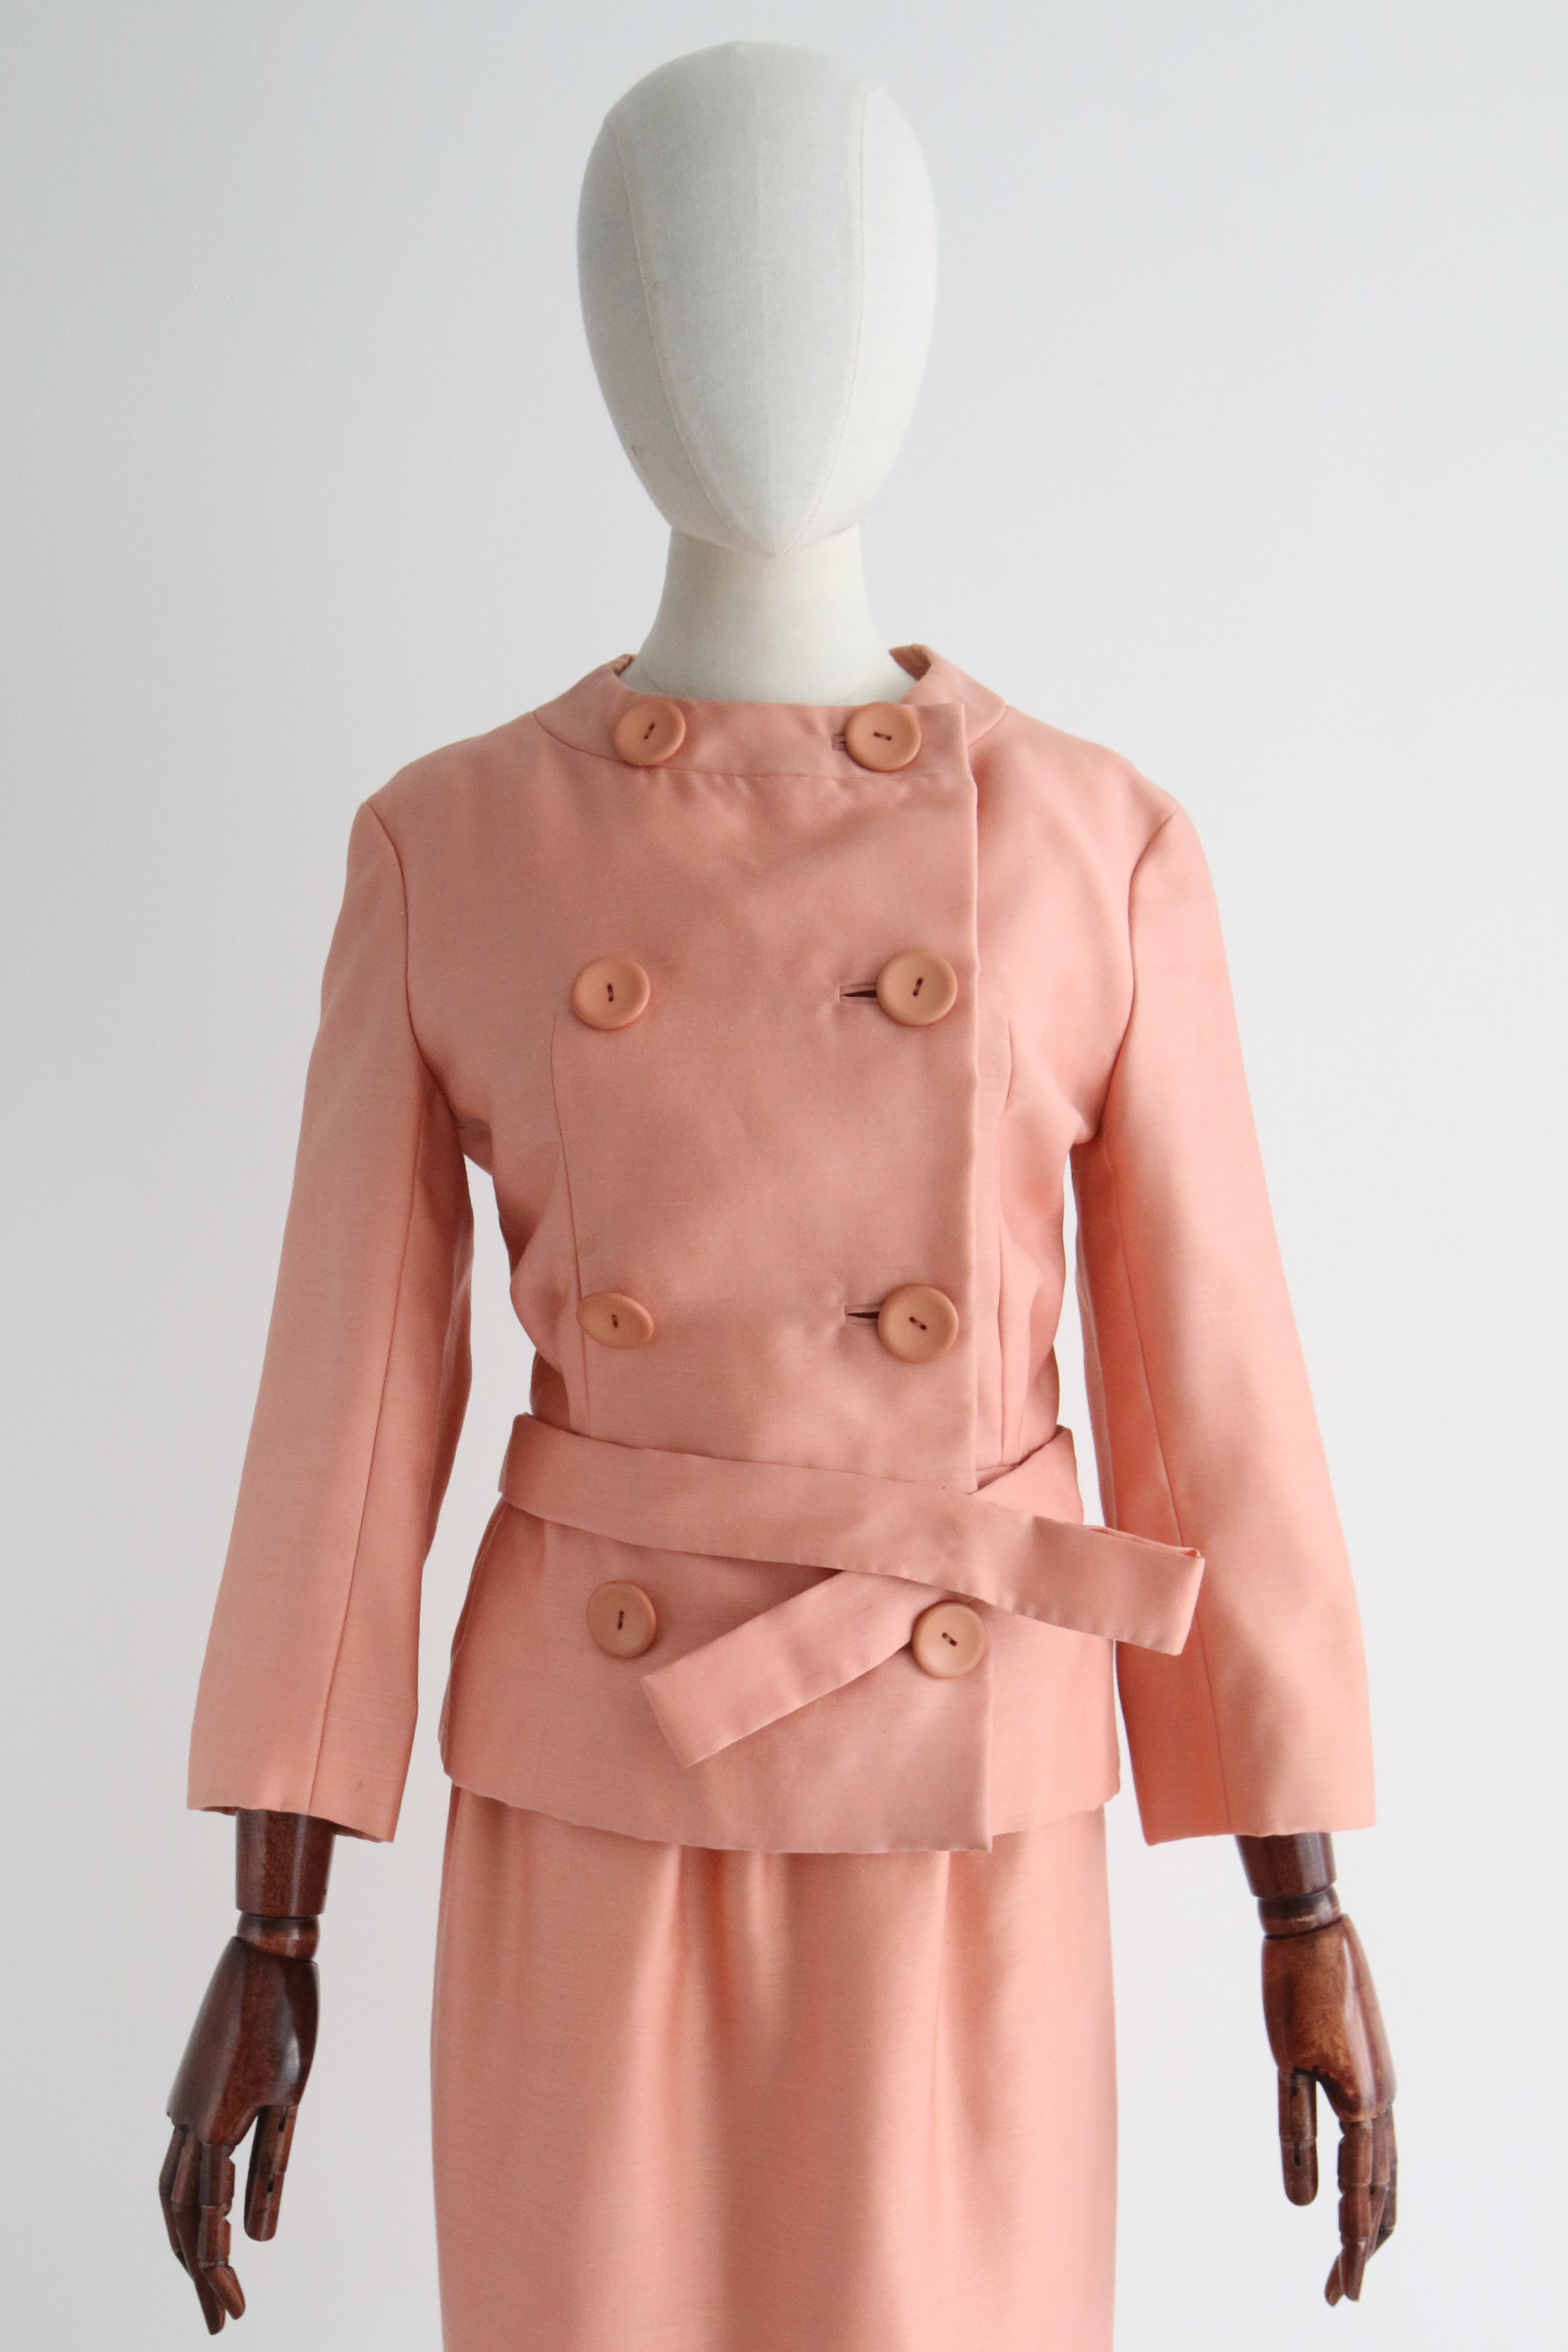 Made in the most elegant shade of blushing peach silk, this original 1960's Christian Dior skirt suit, is a rare addition to your vintage collection. 

The rounded neckline of the jacket is framed by a stand-away panelled collar which draws together